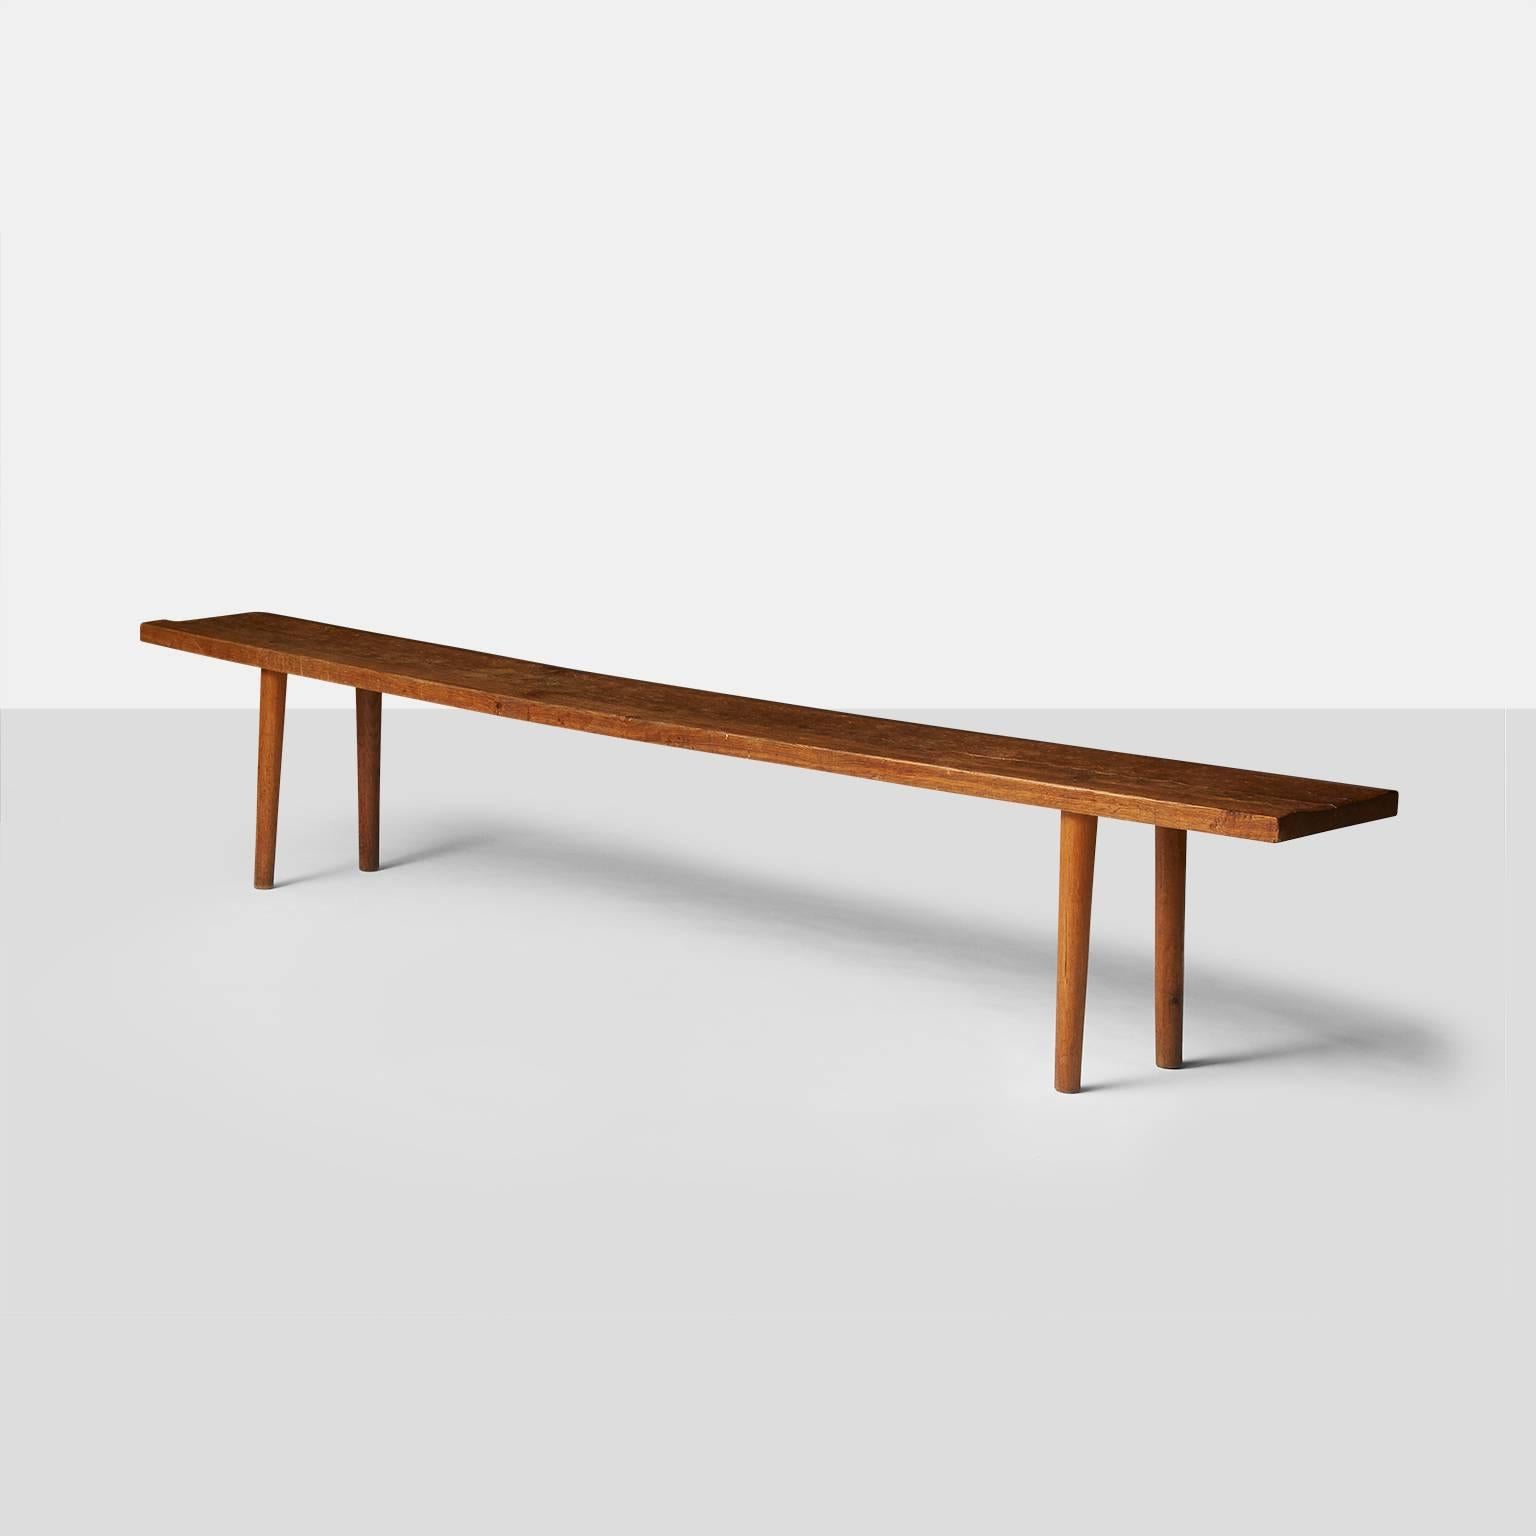 A unique oak bench made in 1955 with a carved texture typical of Jean Touret's work. The seat is made of one solid oak plank and rests on four slightly tapered legs. Retains the original branding 